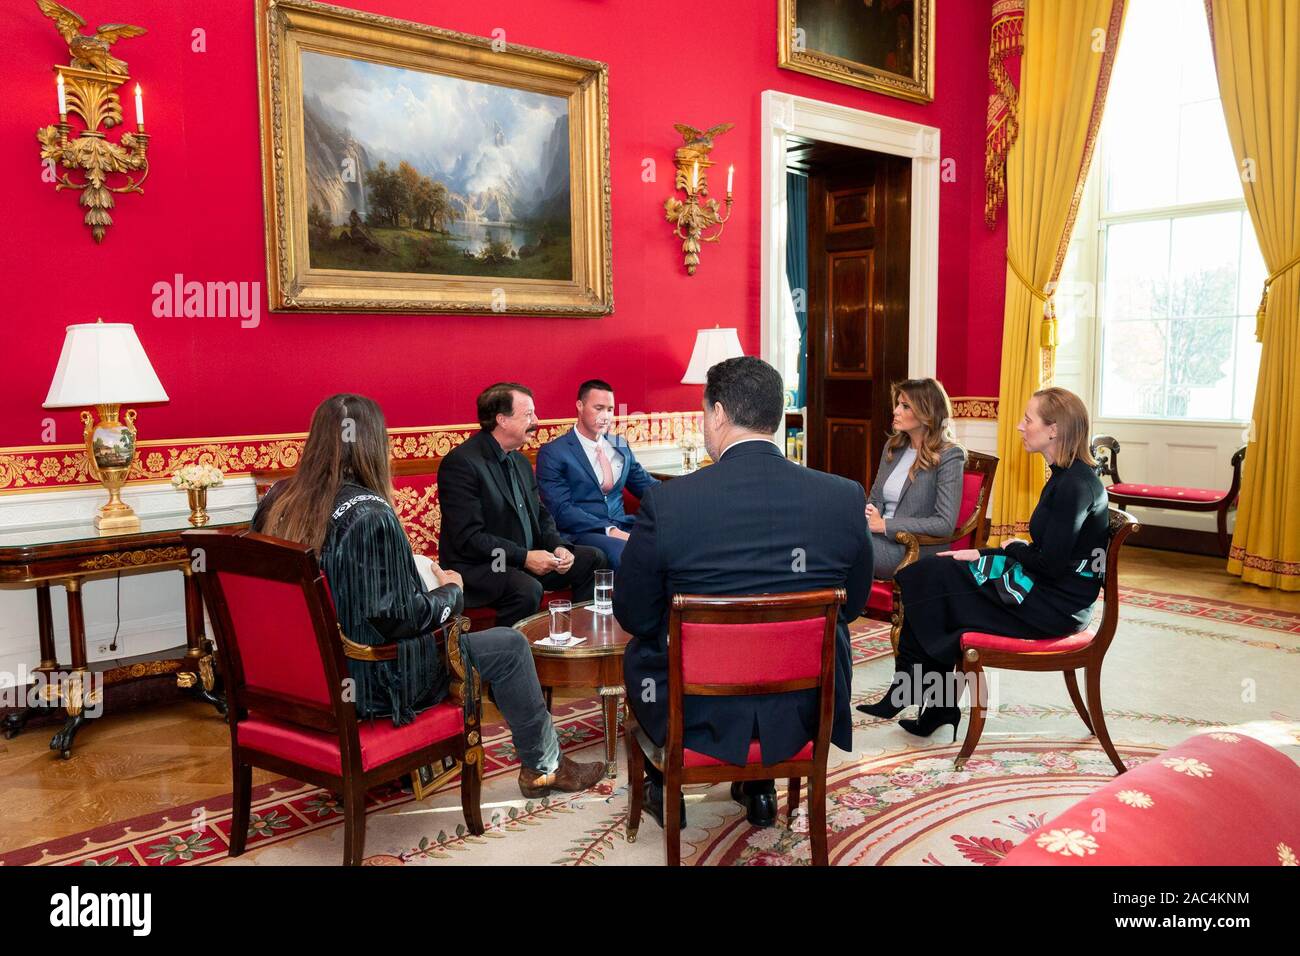 First Lady Melania Trump meets with musician Billy Ray Cyrus and David and Joshua Smith, the family of 16 year-old Channing Smith, to discuss cyber bullying and online safety Monday, Nov. 18, 2019, in the Red Room of the White House. Channing died by suicide in September after a cyber bullying incident. Stock Photo